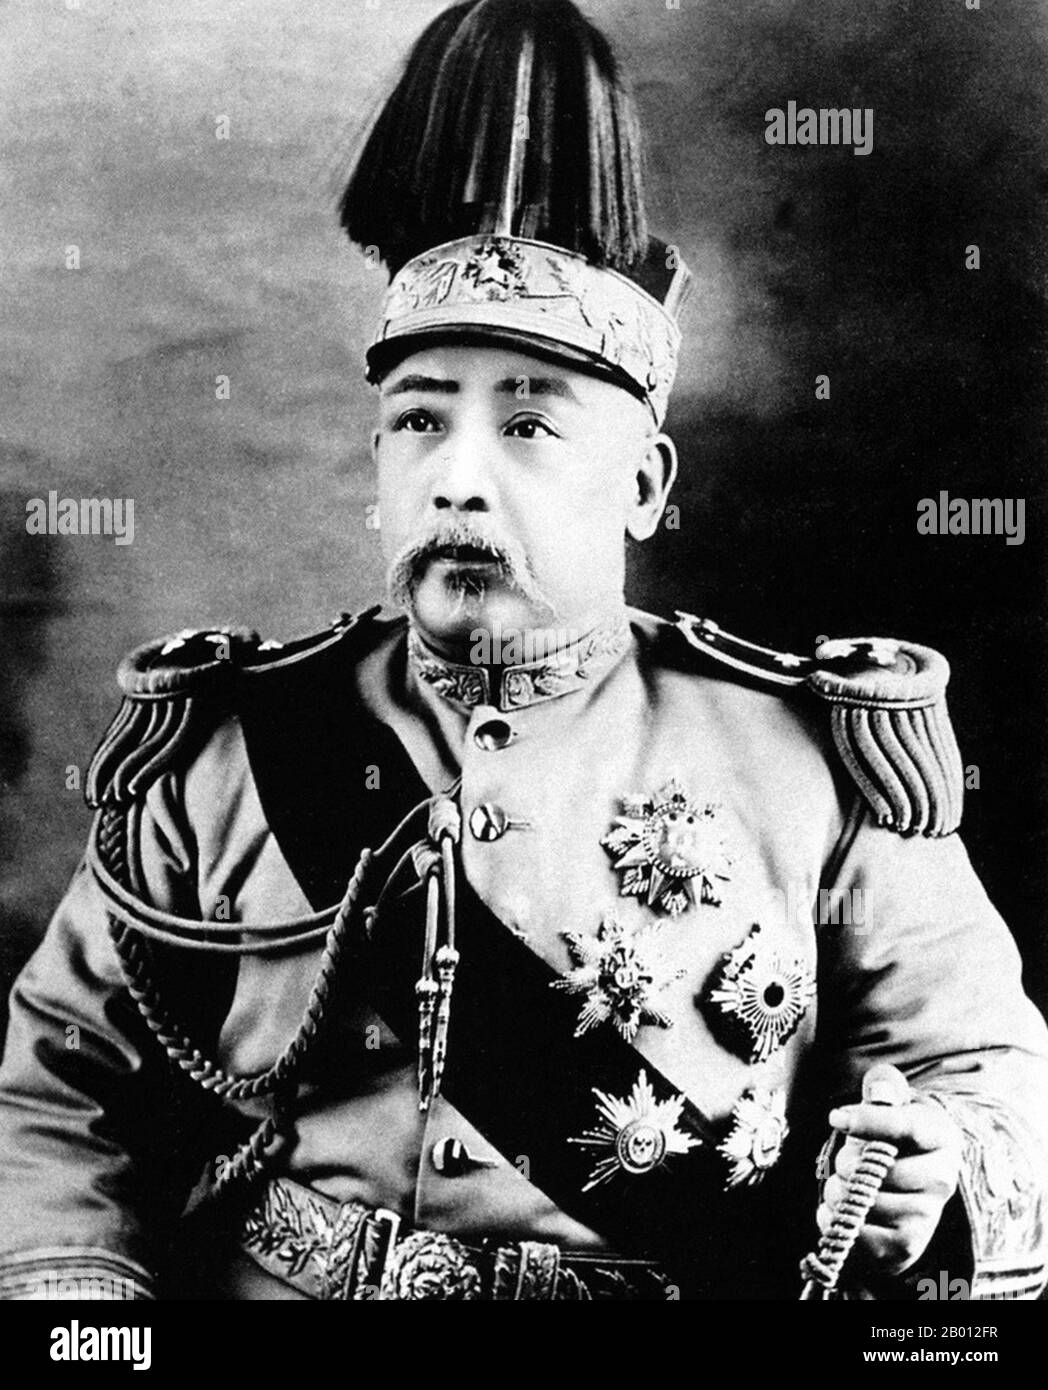 China: Yuan Shikai (Yuan Shih-k'ai, 1859–1916), First President of the Republic of China (1912-1915), 'Emperor of China' (1915-1916), 1915.  Yuan Shikai (Yuan Shih-k'ai, 16 September 1859–6 June 1916) was an important Chinese general and politician famous for his influence during the late Qing Dynasty, his role in the events leading up to the abdication of the last Qing Emperor of China, his autocratic rule as the first President of the Republic of China, and his short-lived attempt to revive the Chinese monarchy, with himself as the 'Great Emperor of China'. Stock Photo